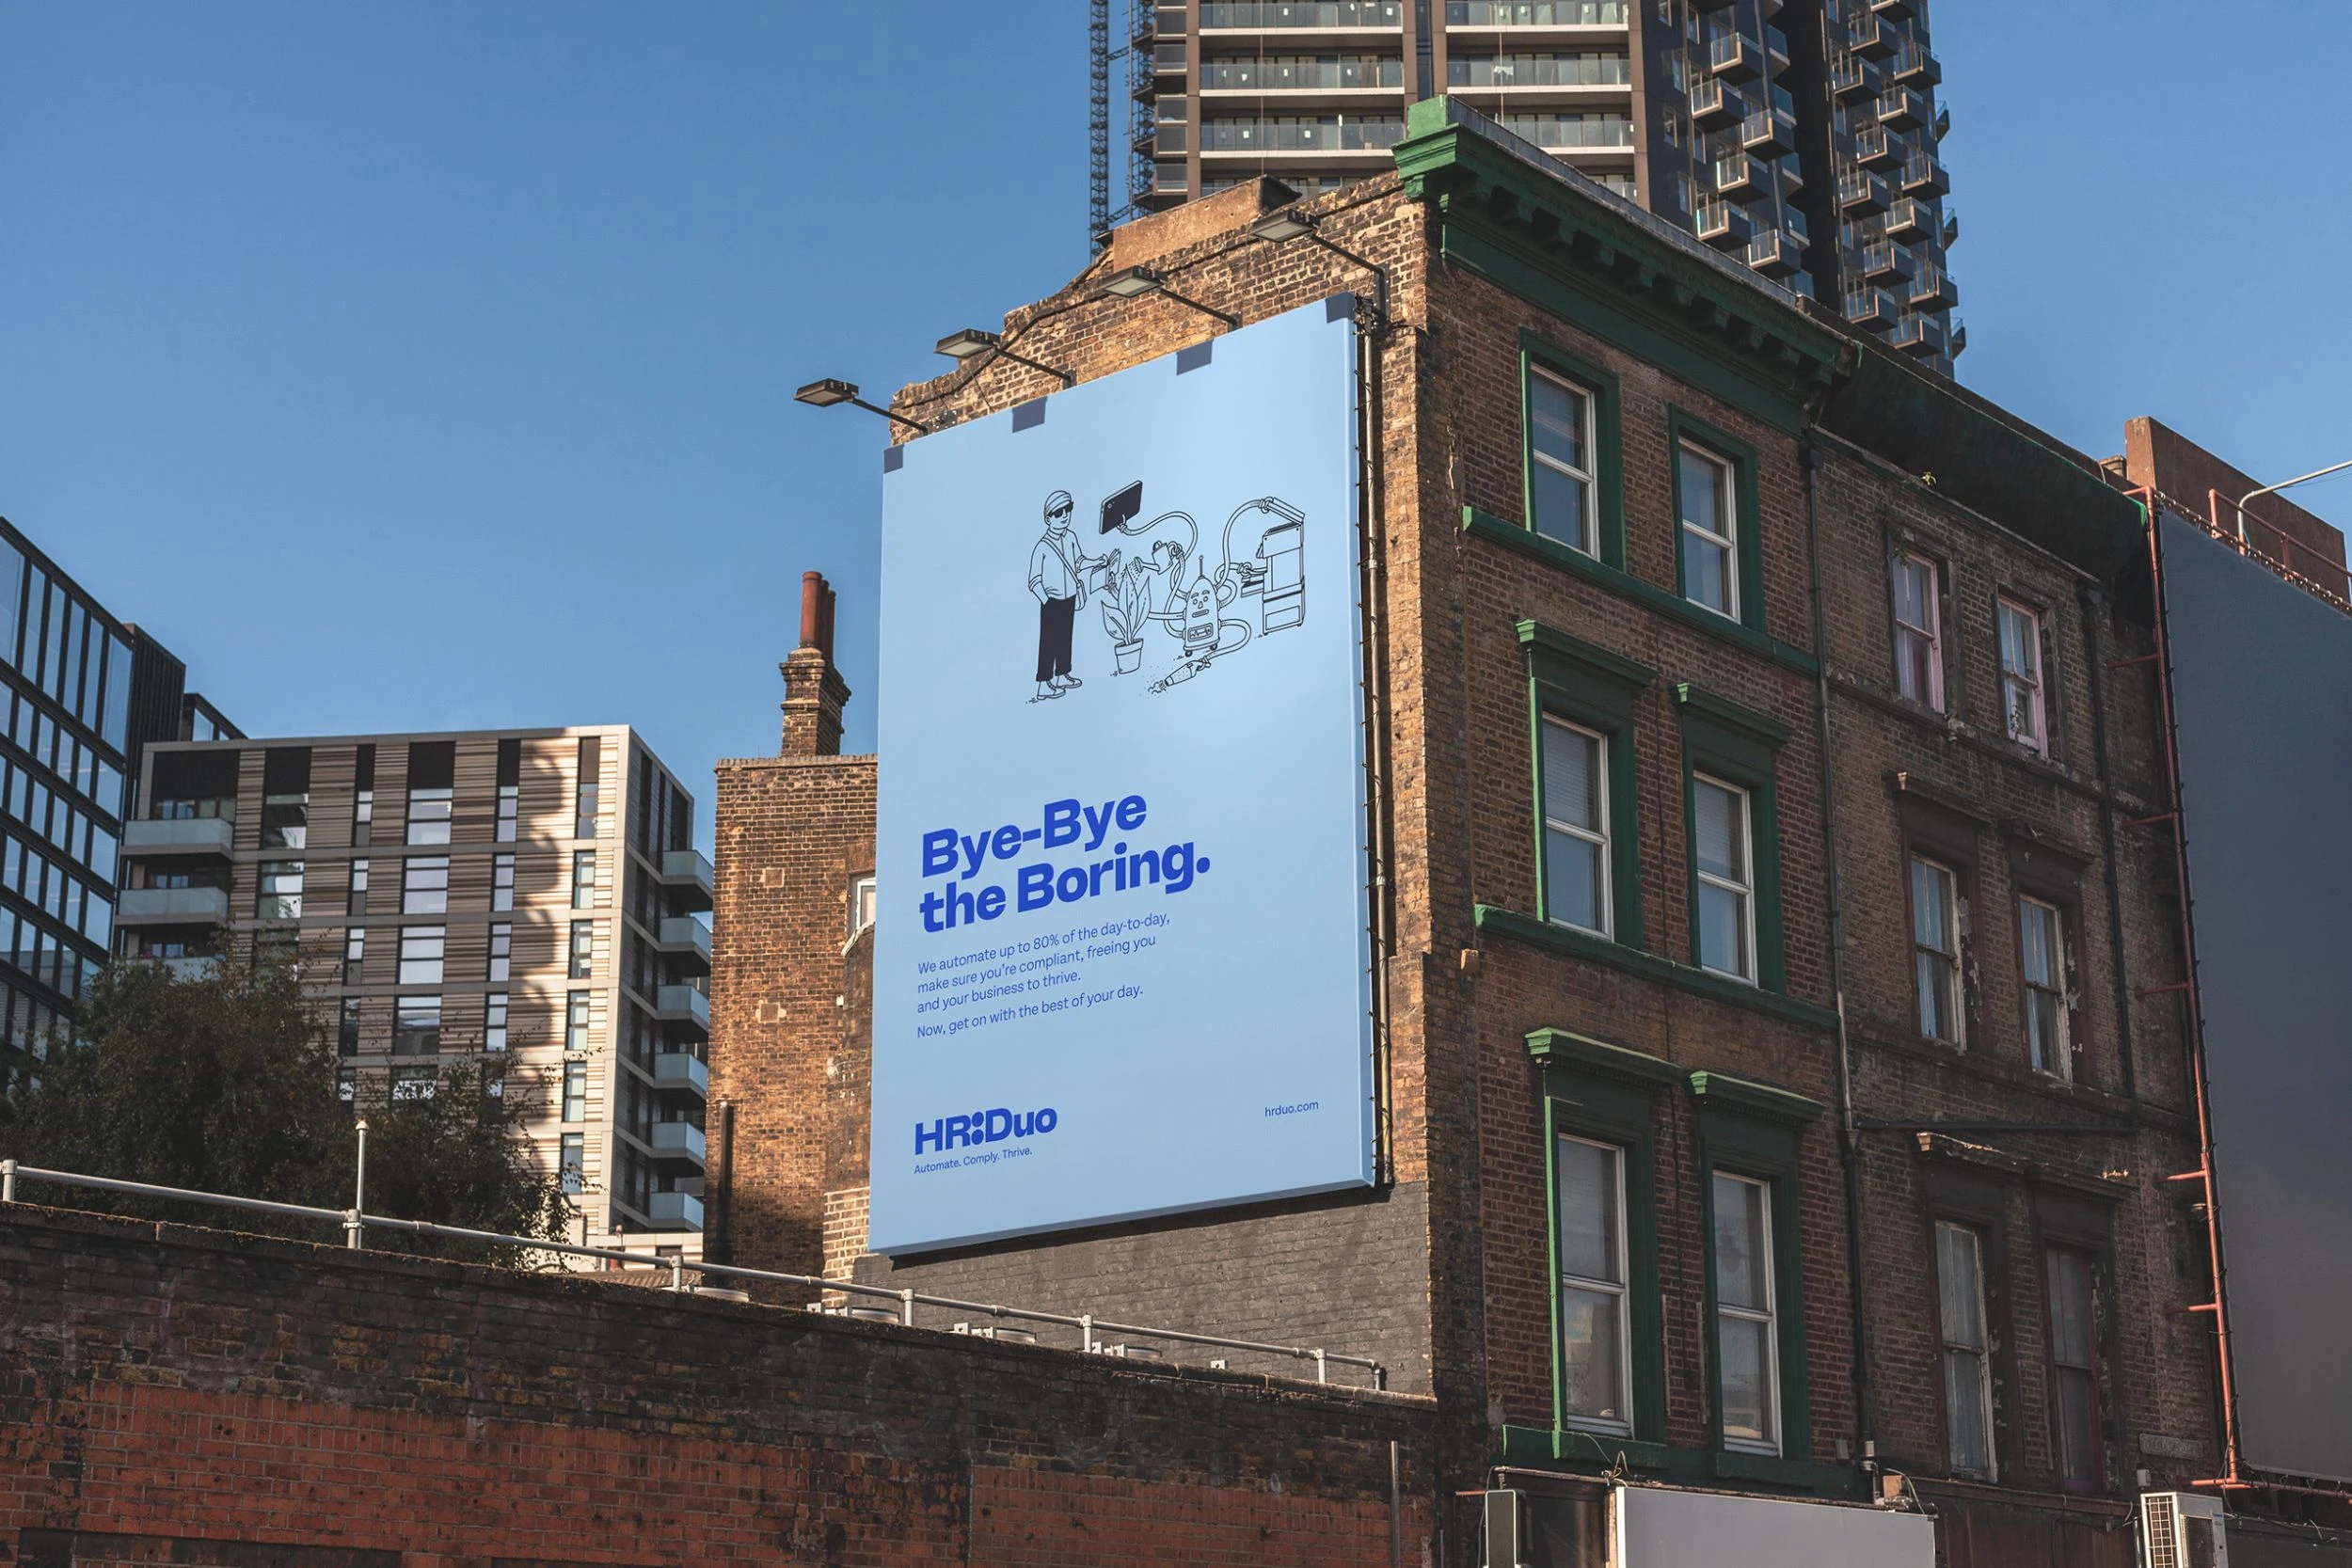 Bye-Bye the Boring. HR:Duo Ad Campaign